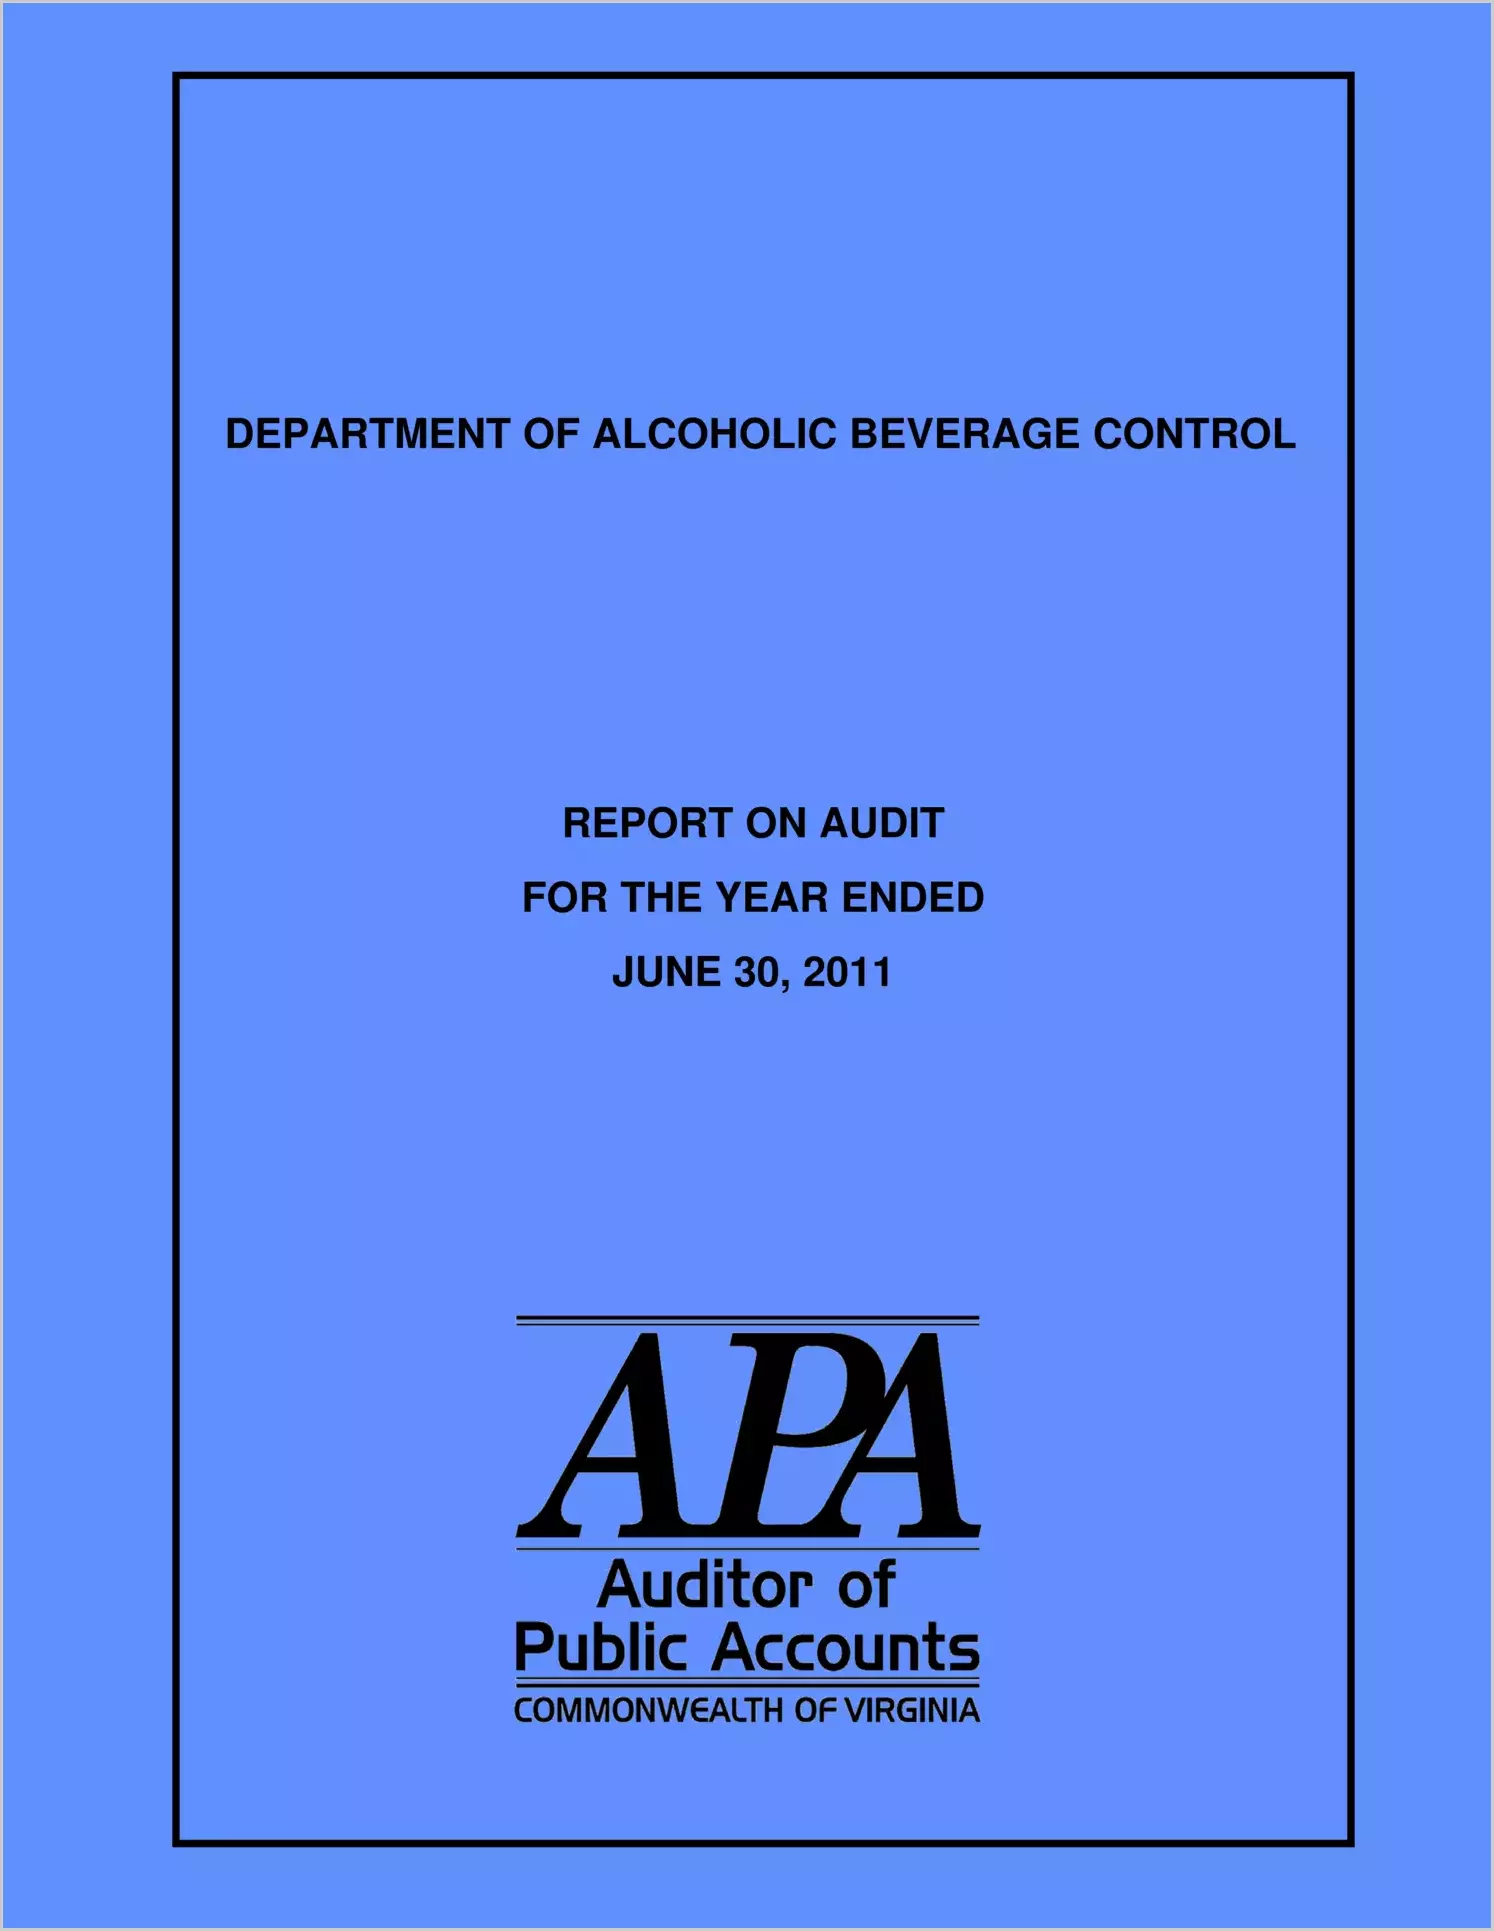 Department of Alcoholic Beverage Control as of and for the year then ended June 30, 2011